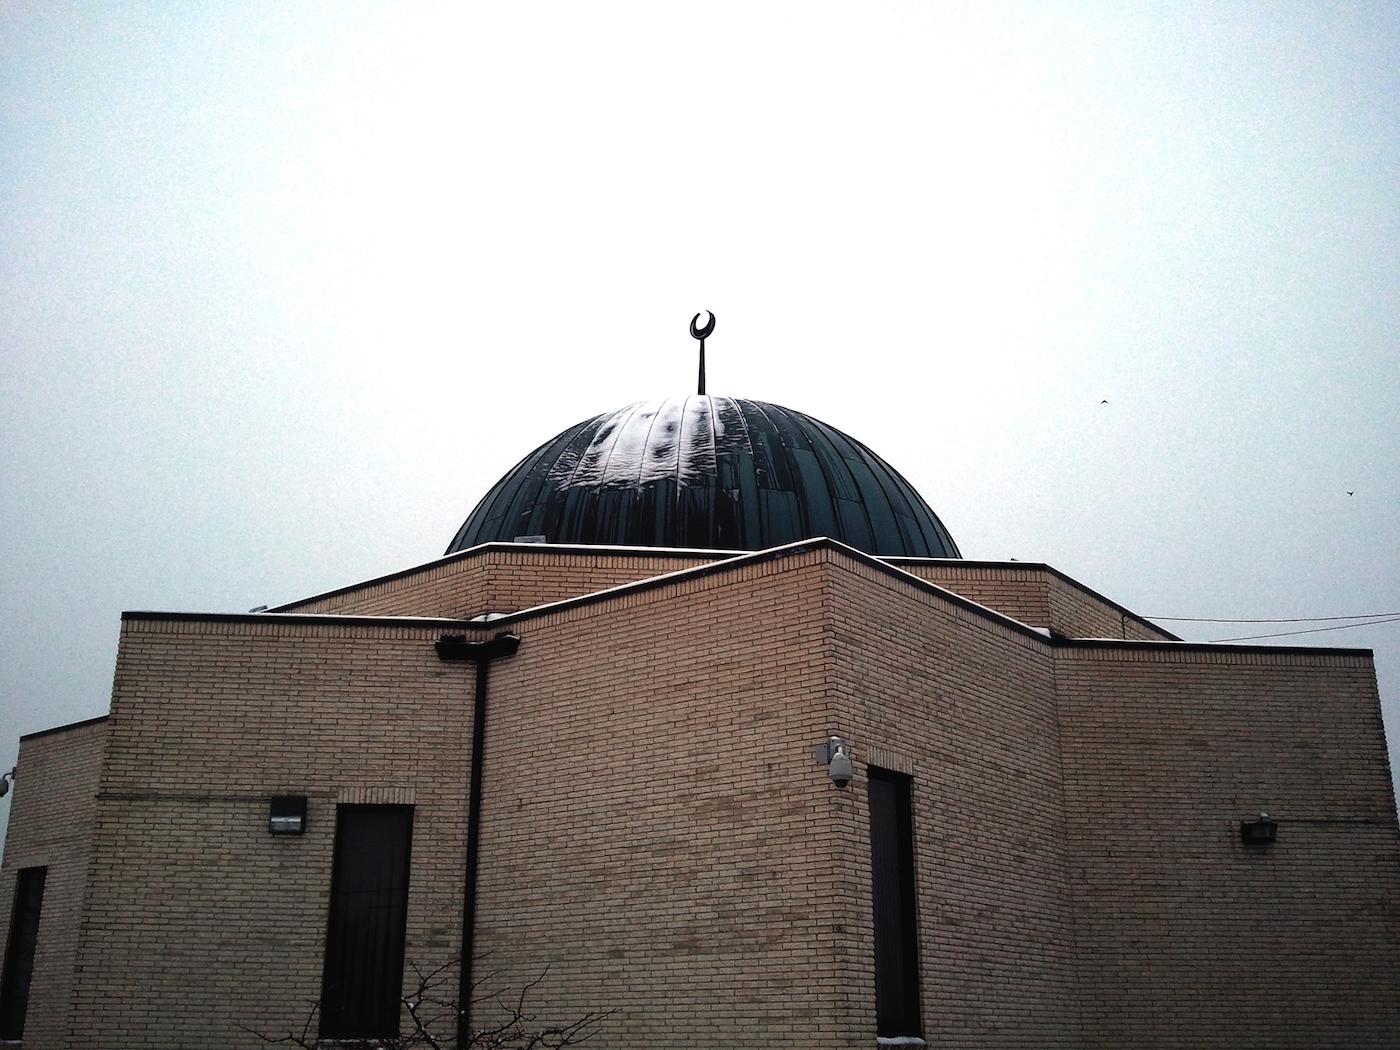 The Mosque Foundation in Bridgeview, Illinois, outside Chicago. Photo: Wikimedia Commons/Khateeb88